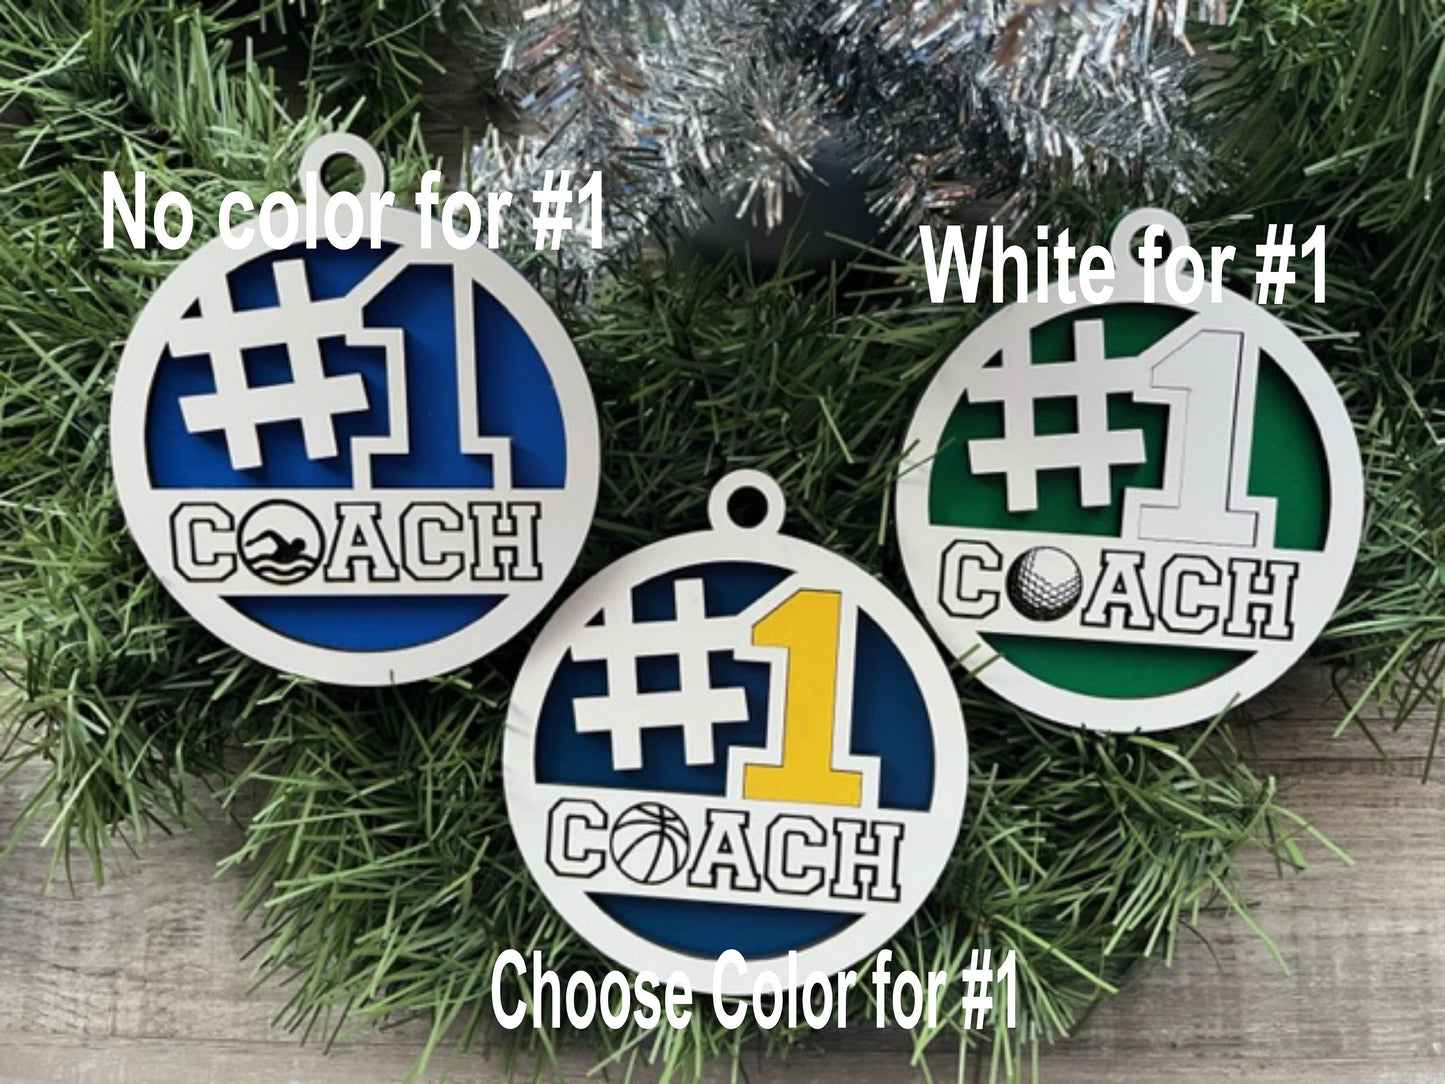 Field Hockey Coach Ornament/ #1 Coach Ornament/ Sports Coach/ Christmas Ornaments/ Sports Ornaments/ Choose Colors/Coach Gift/Gift for Coach